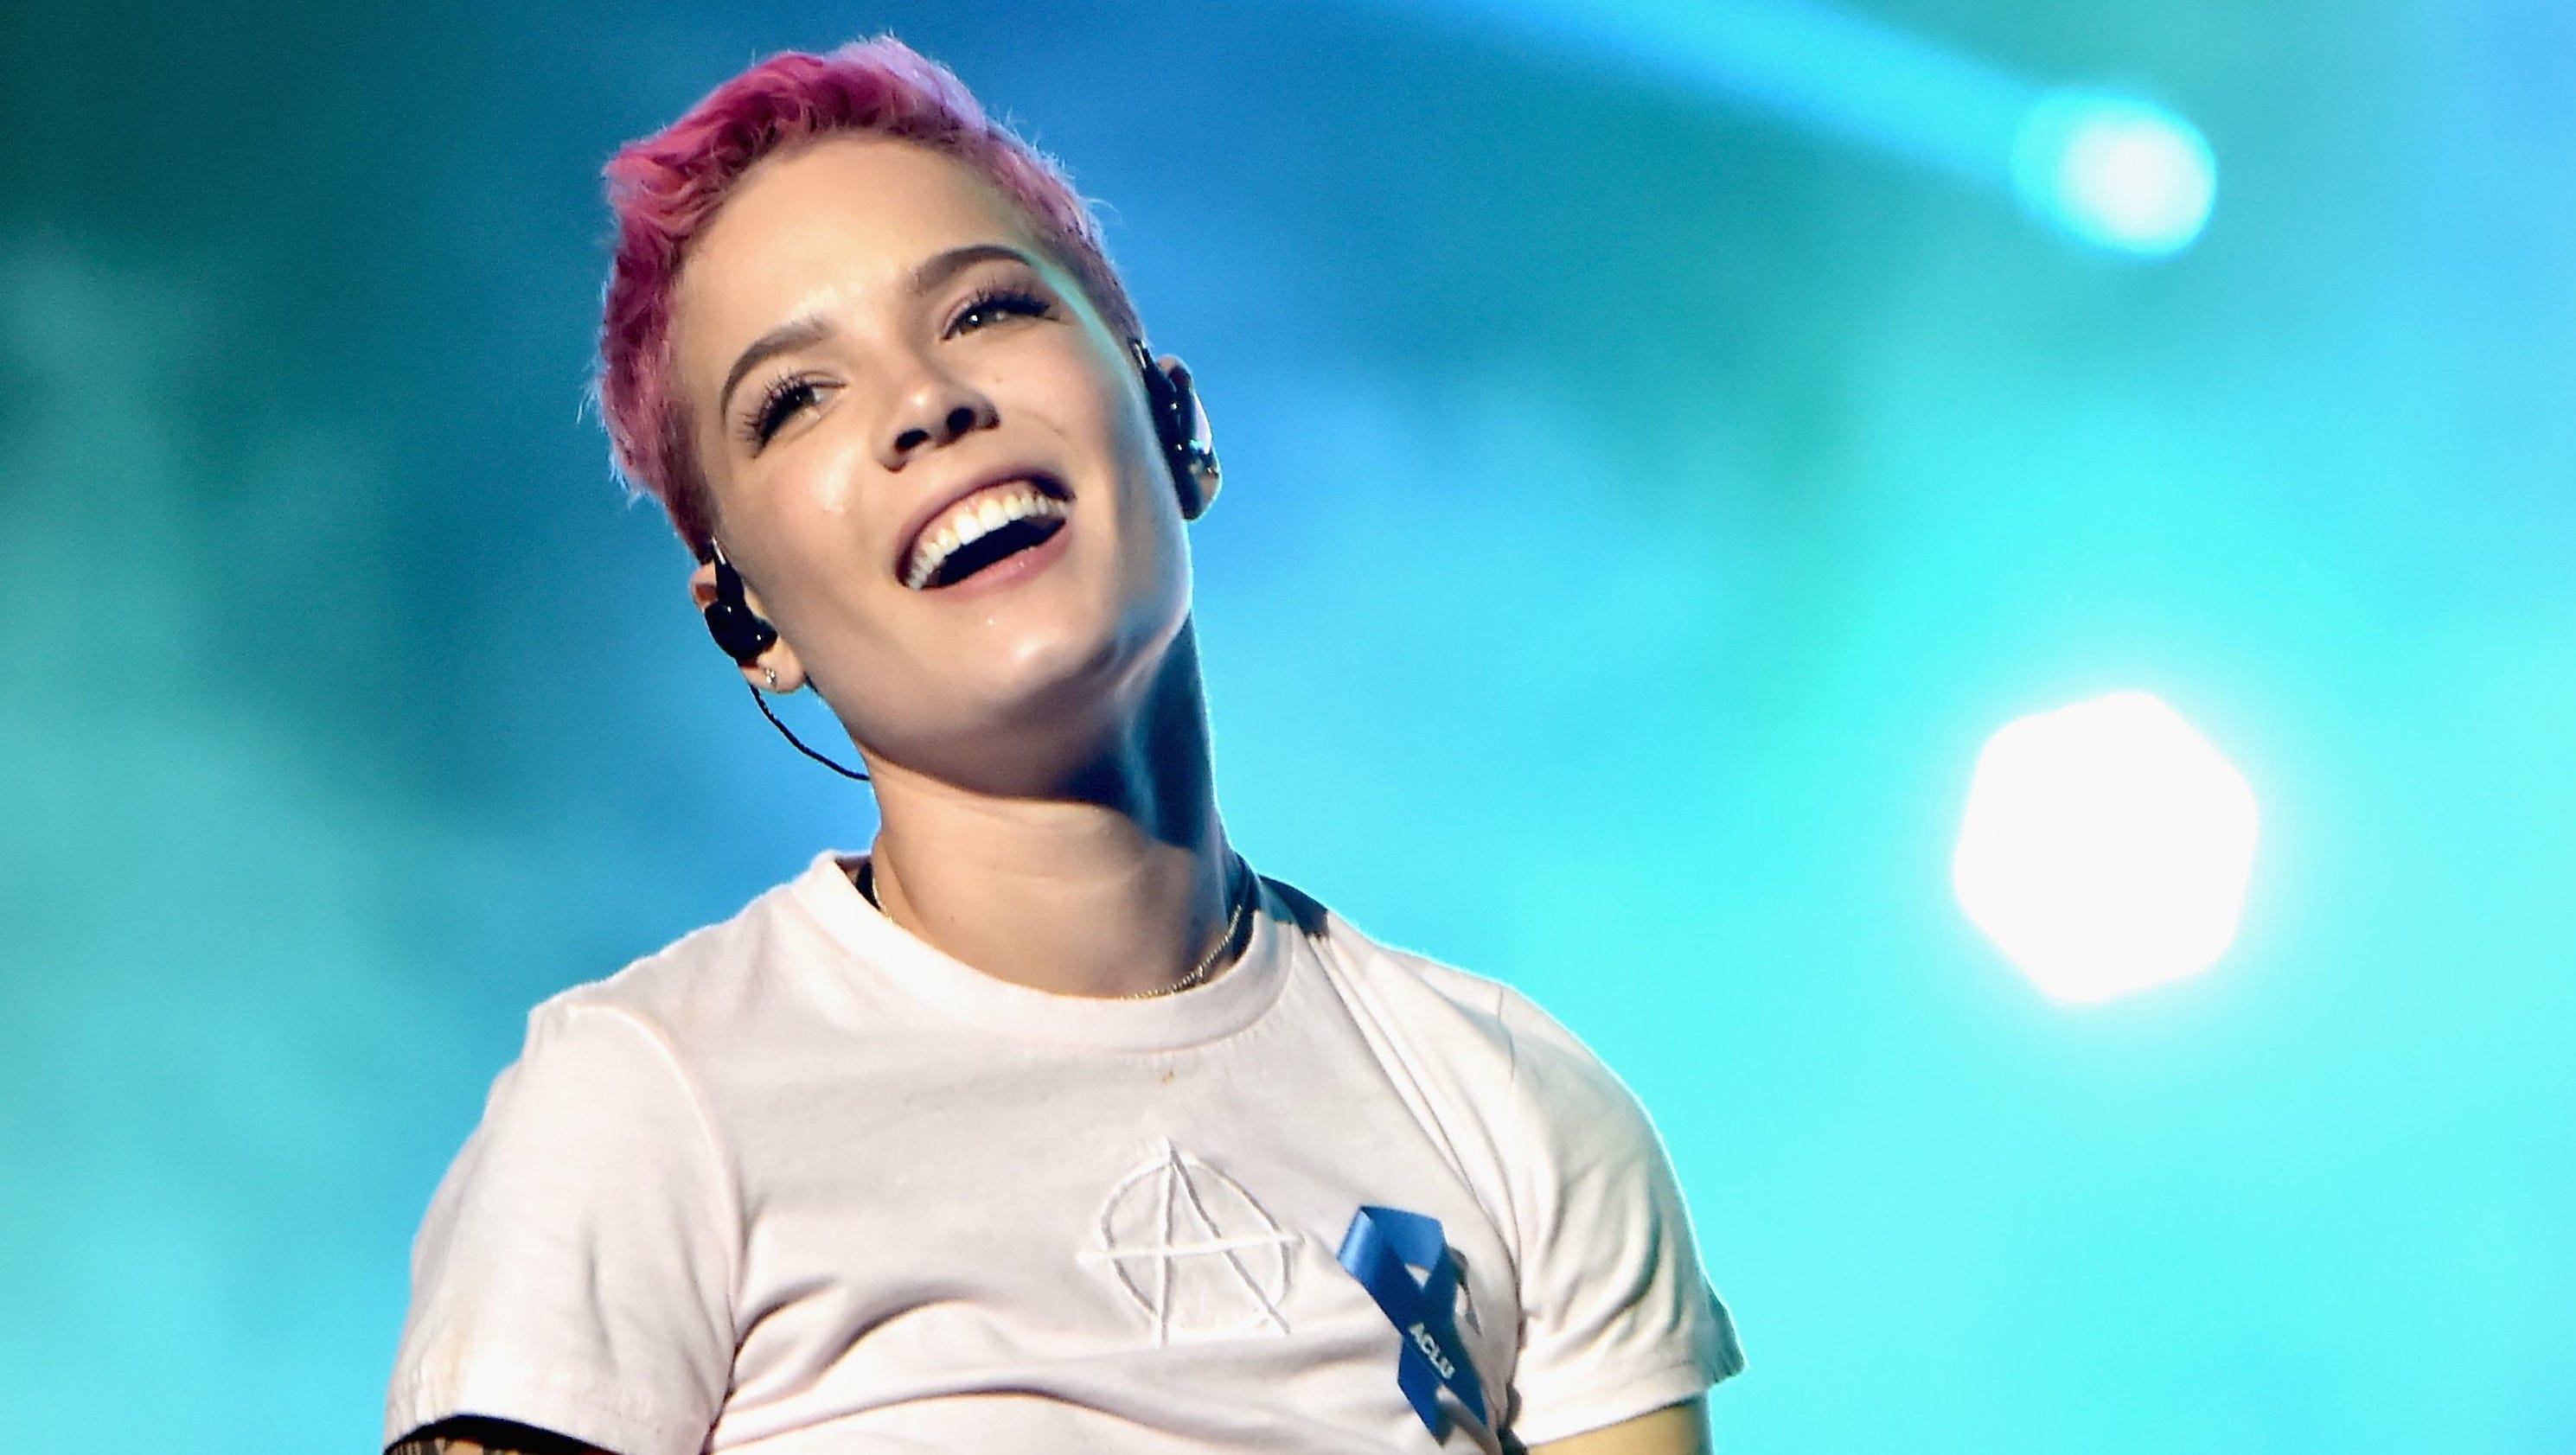 Halsey is a criminal on the run in her 'Bad At Love' music video3200 x 1680